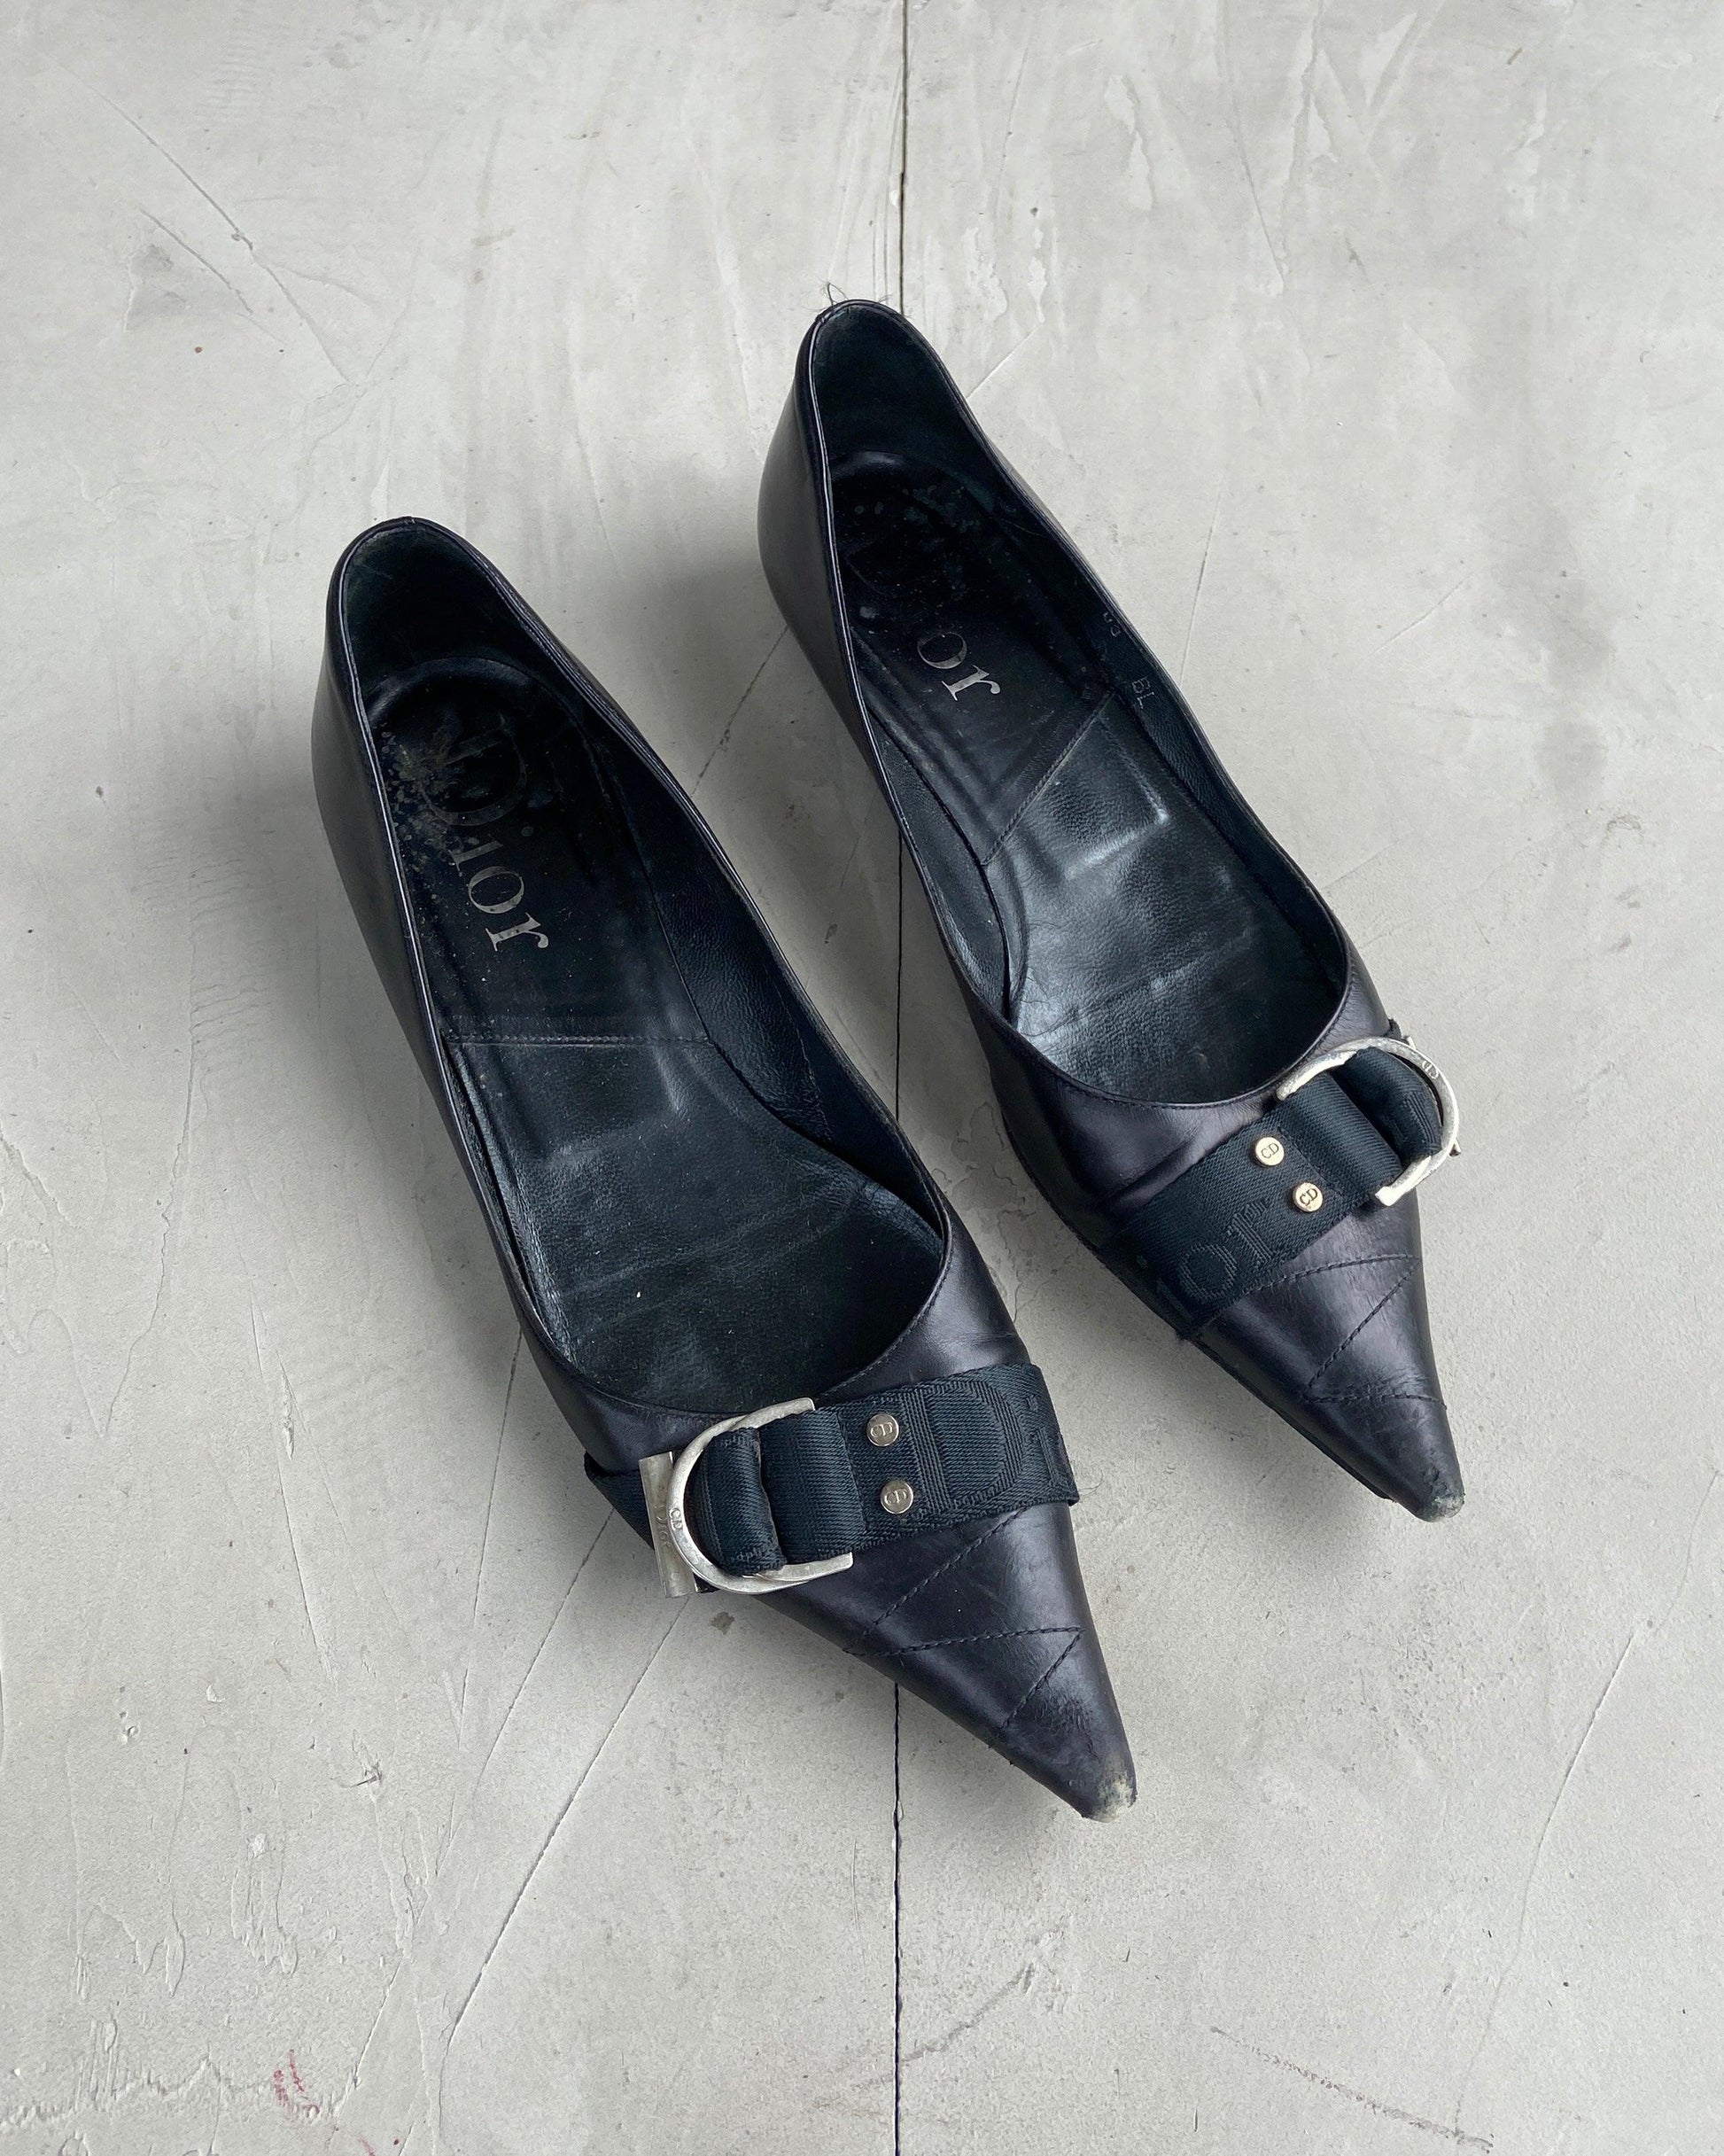 CHRISTIAN DIOR 'D' LEATHER FLATS - EU 38 / UK 5 - Known Source